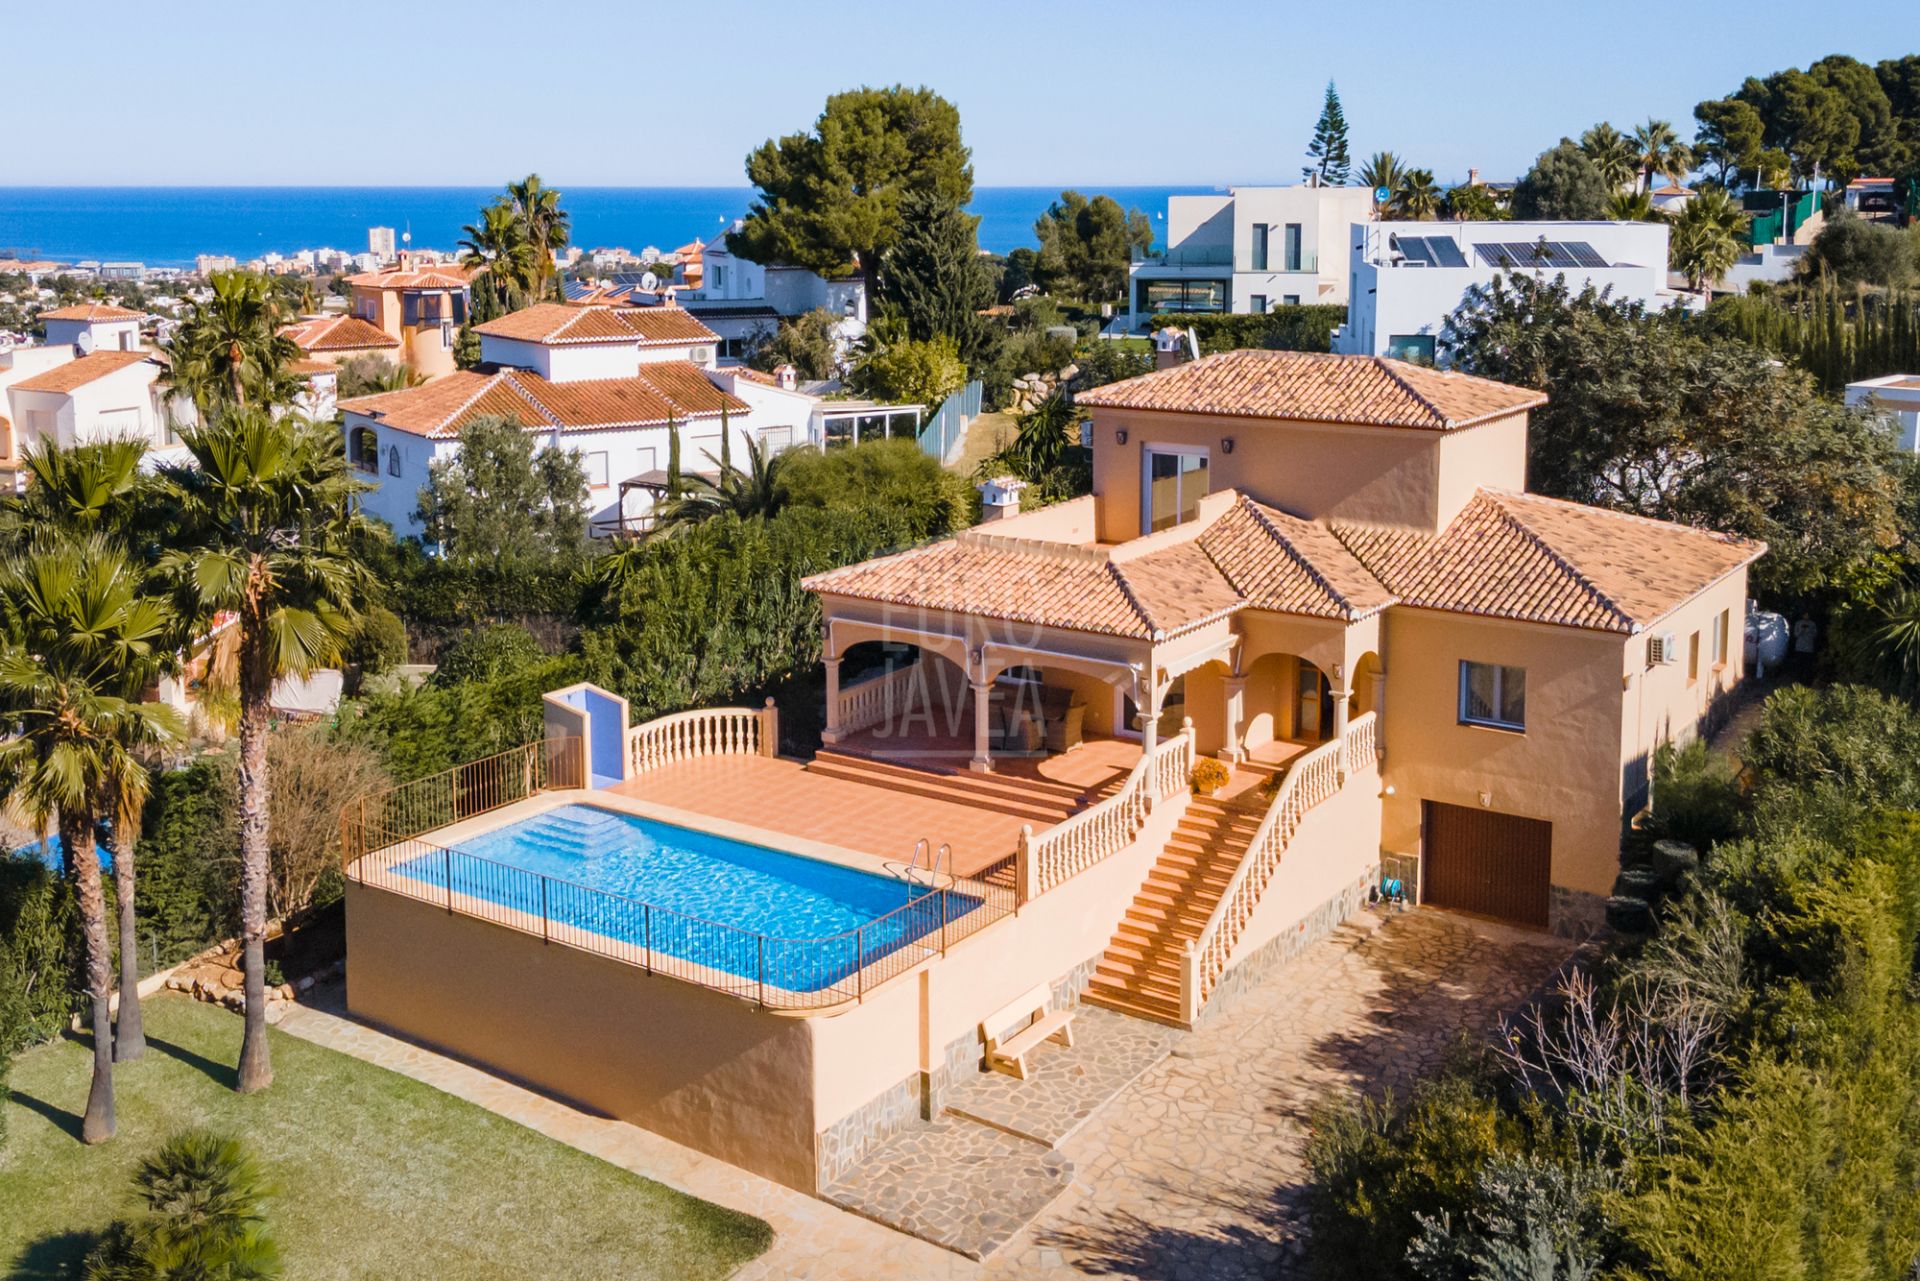 Villa for sale exclusively with Eurojavea in the Pinomar area, a few minutes from the beach